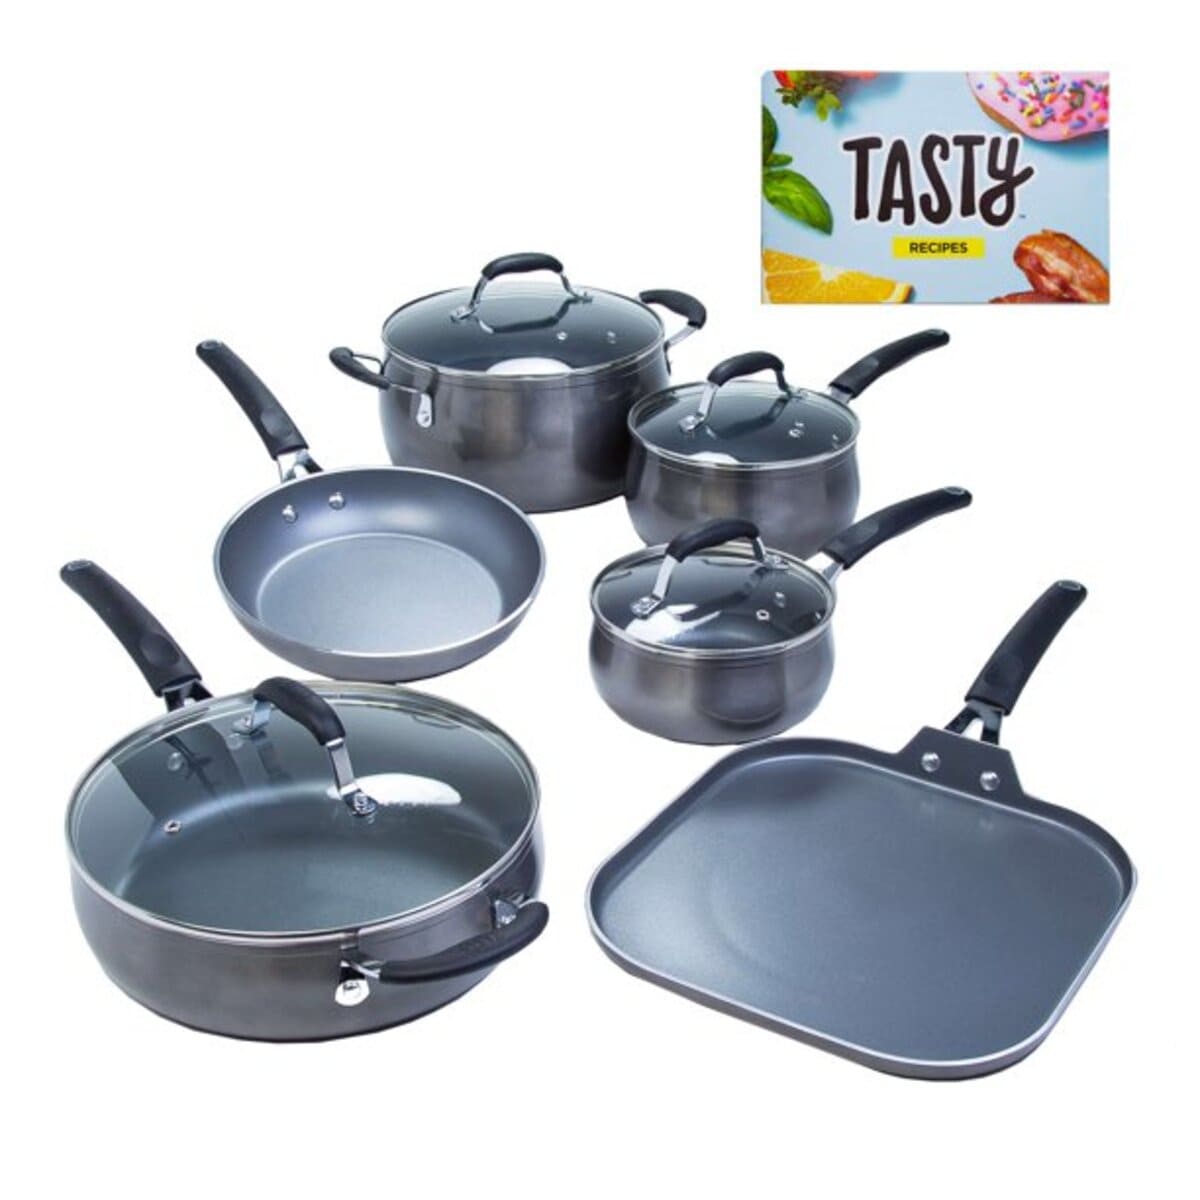 who manufactures tasty cookware